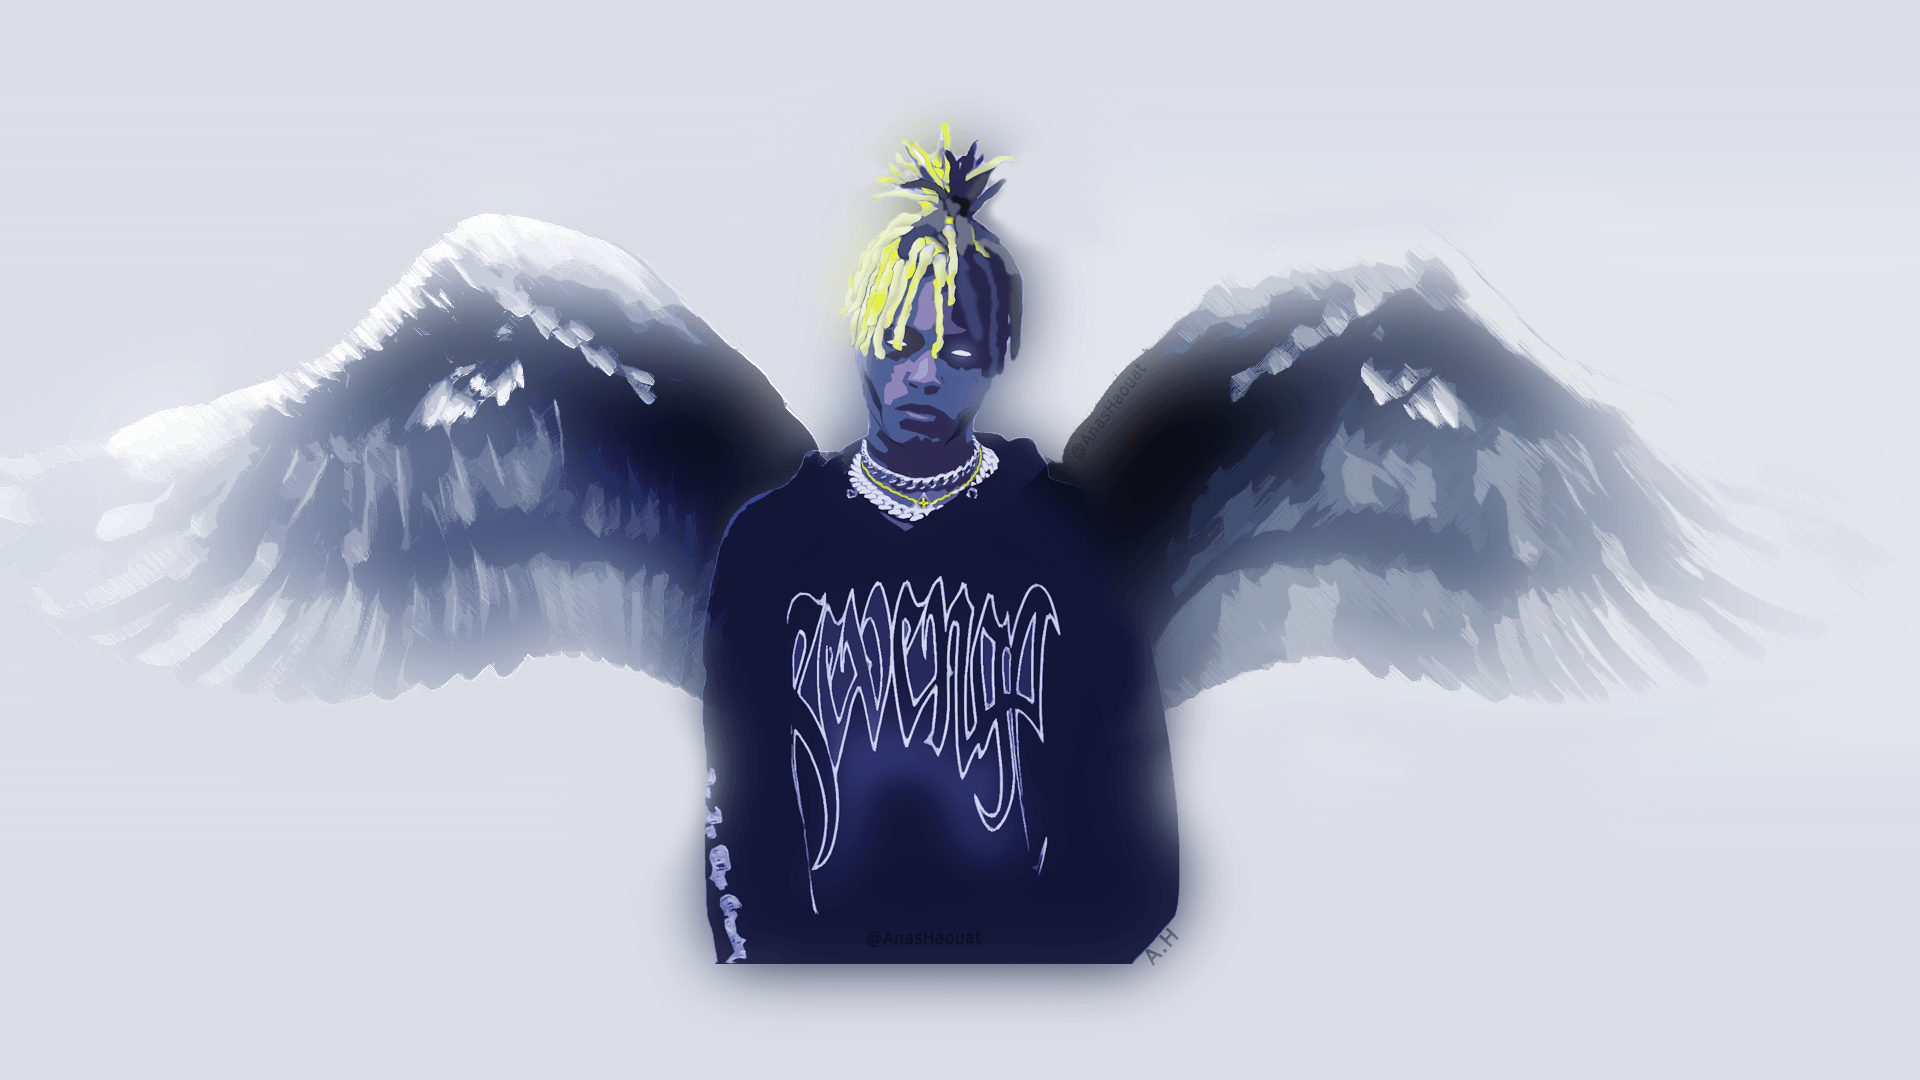 Xxxtentacion with Wings Wallpapers on WallpaperDog.